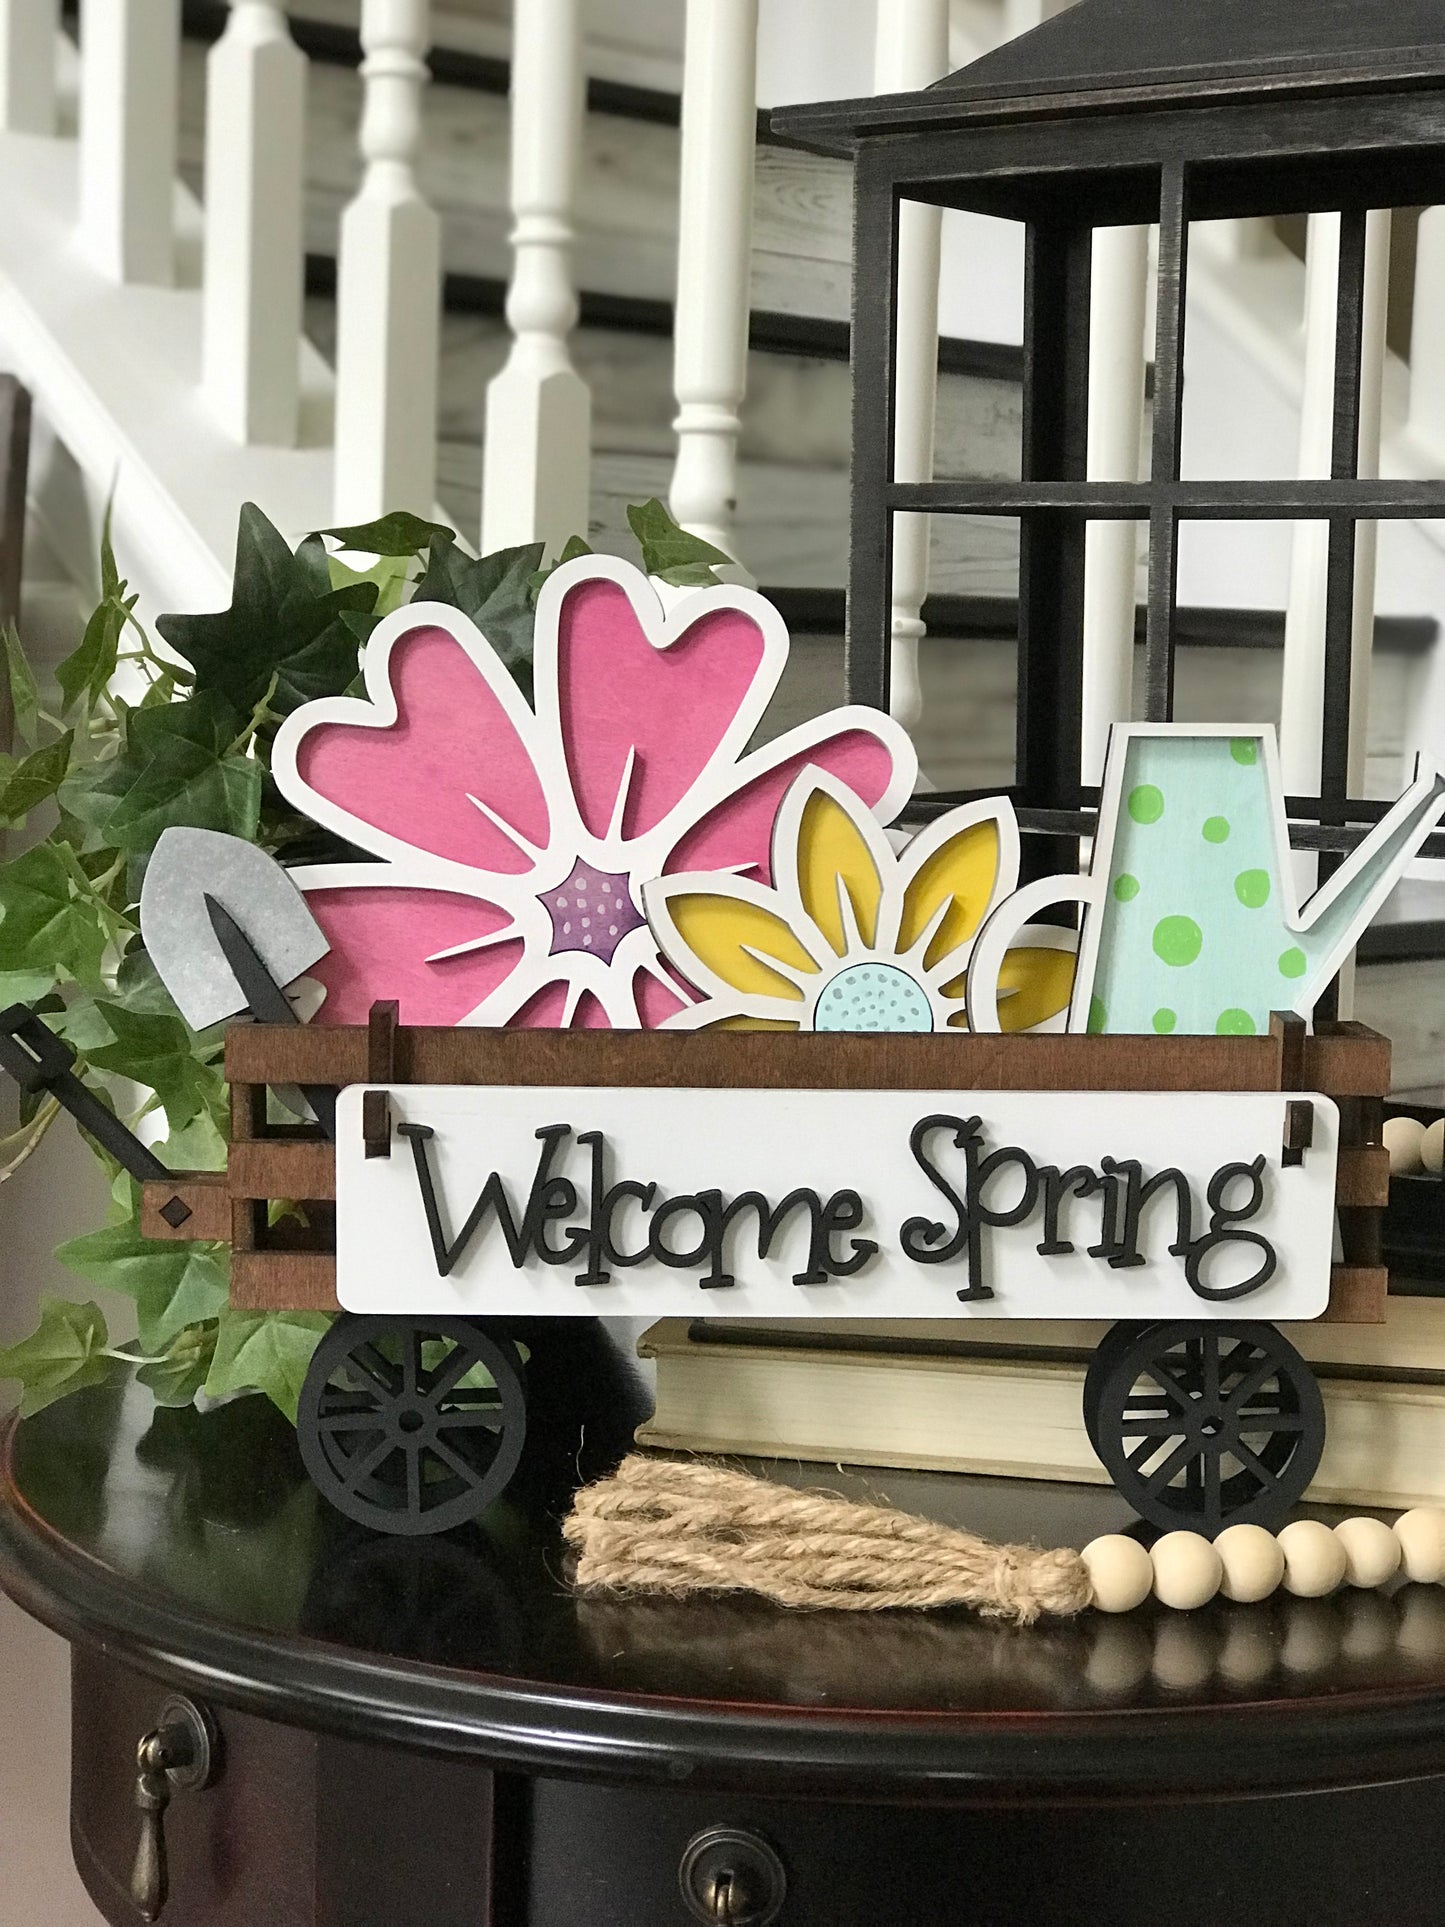 Spring Interchangeable Set for Wagon/Crate/Raised Shelf